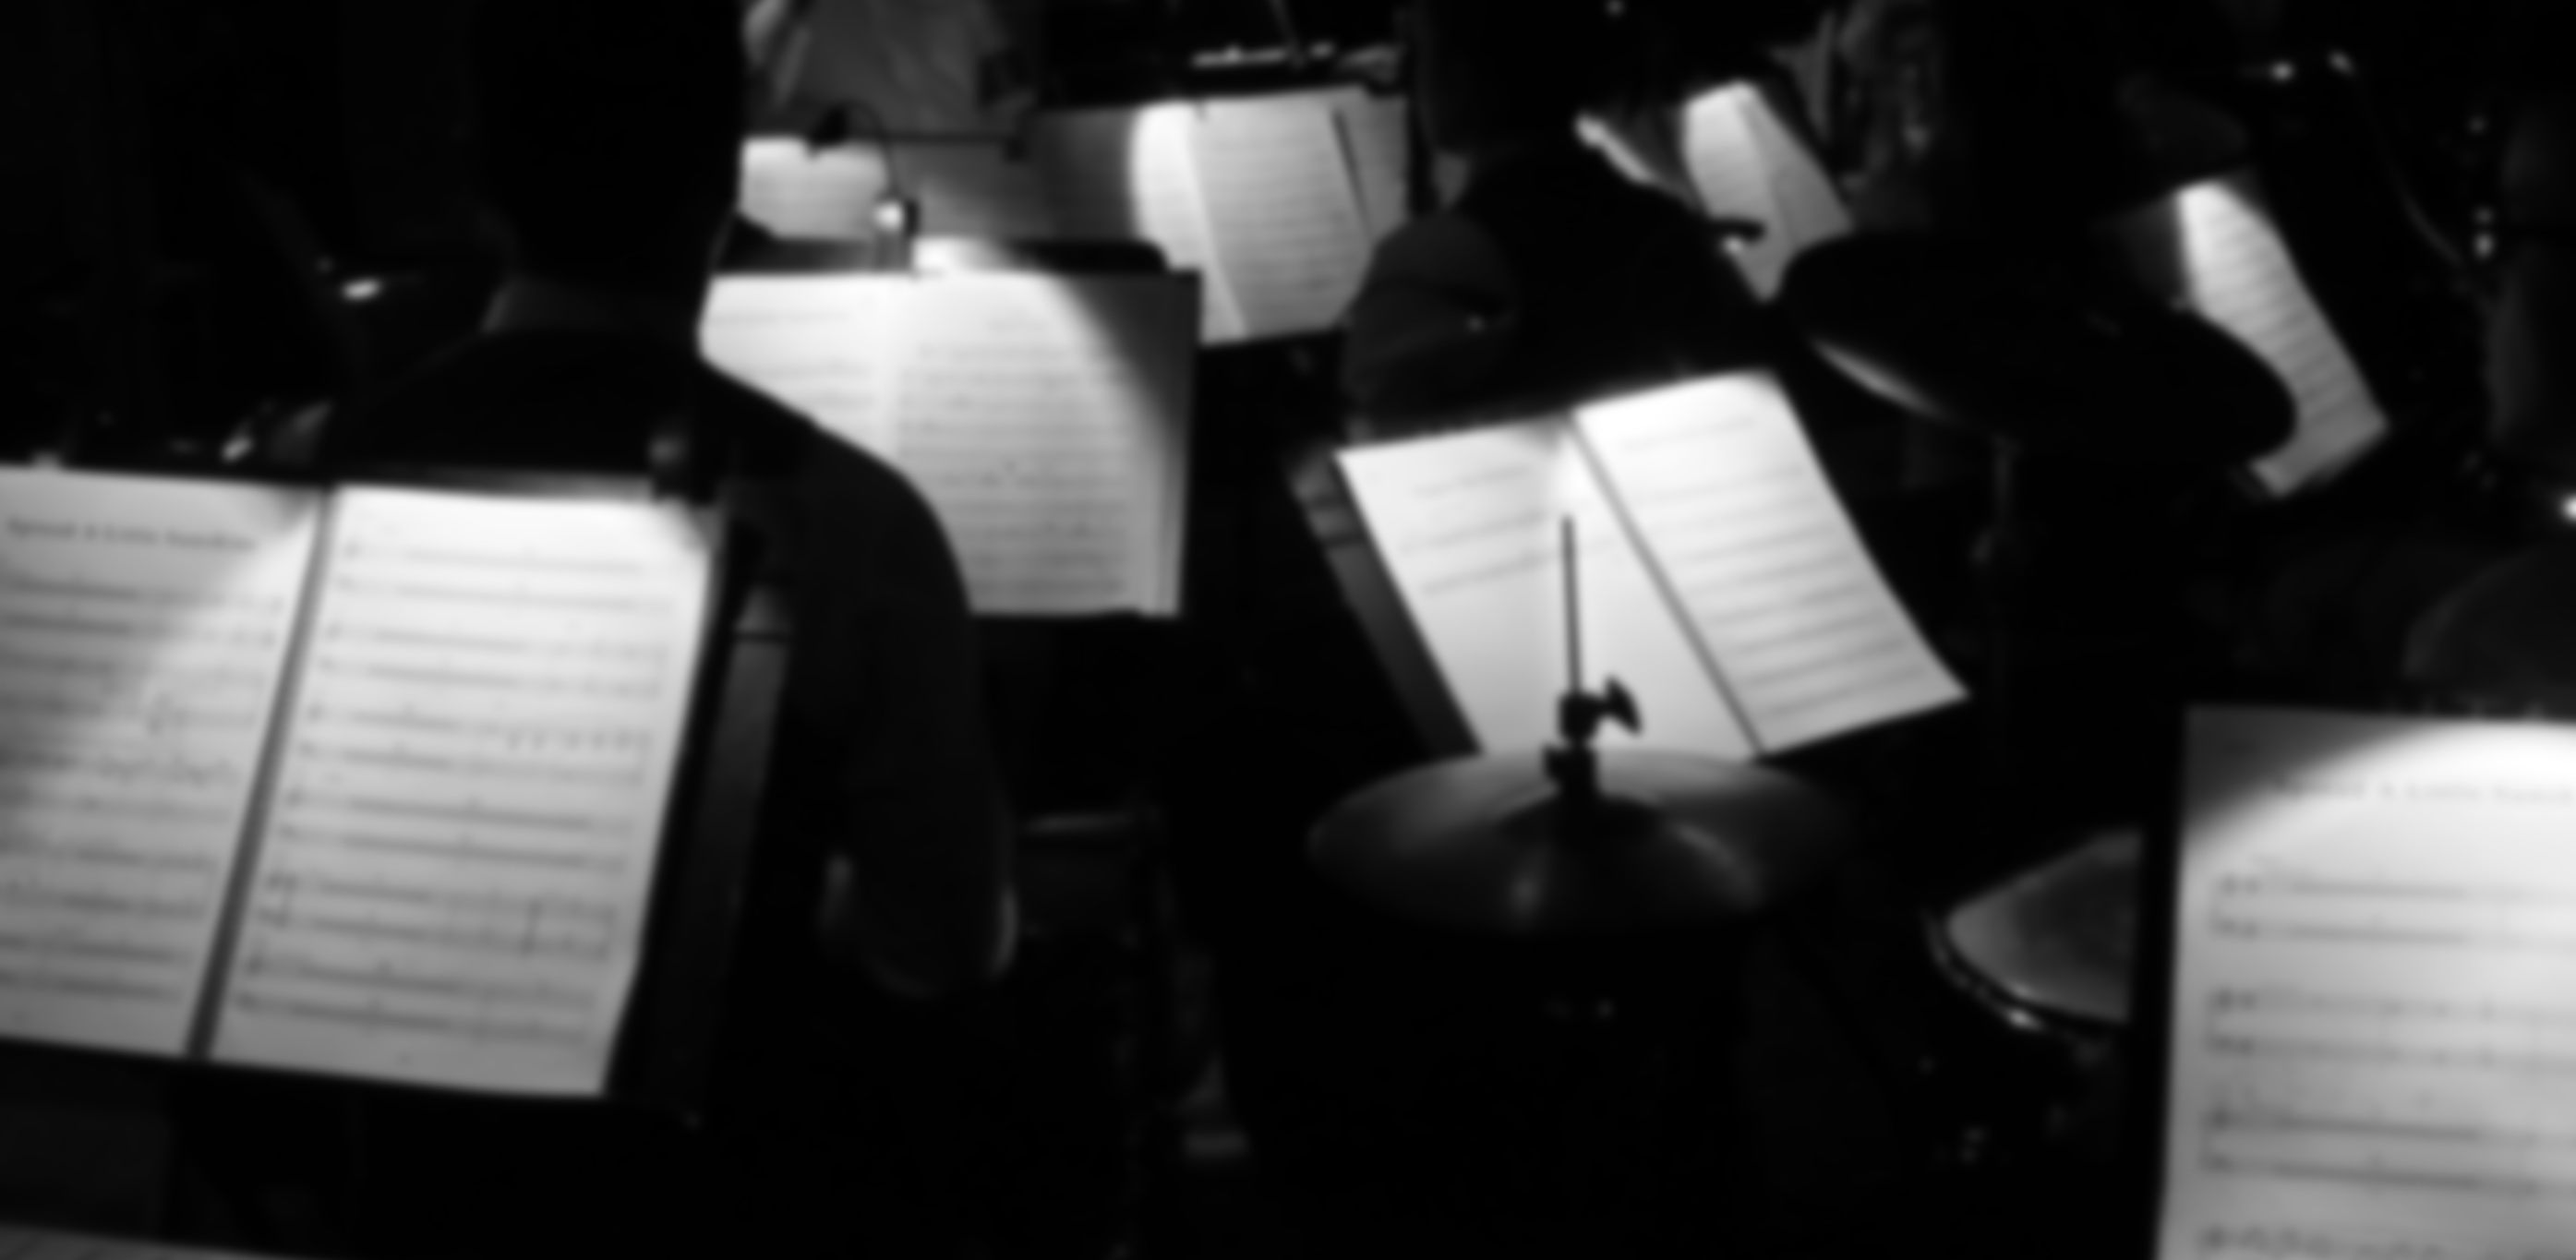 Orchestra pit showing music in black and white